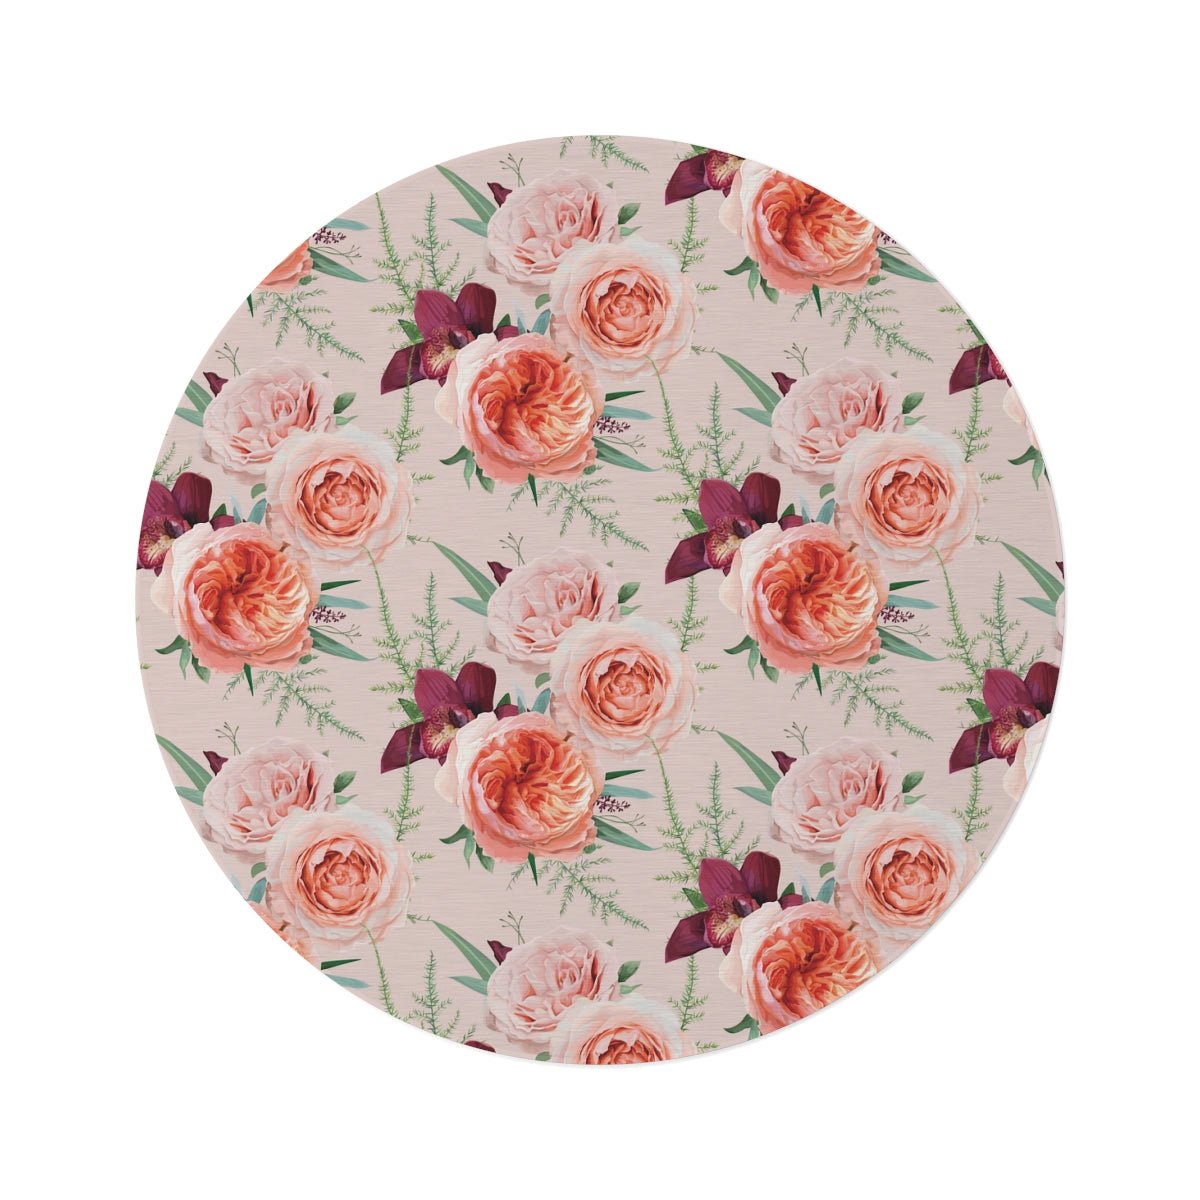 Blush Roses Round Rug - Puffin Lime